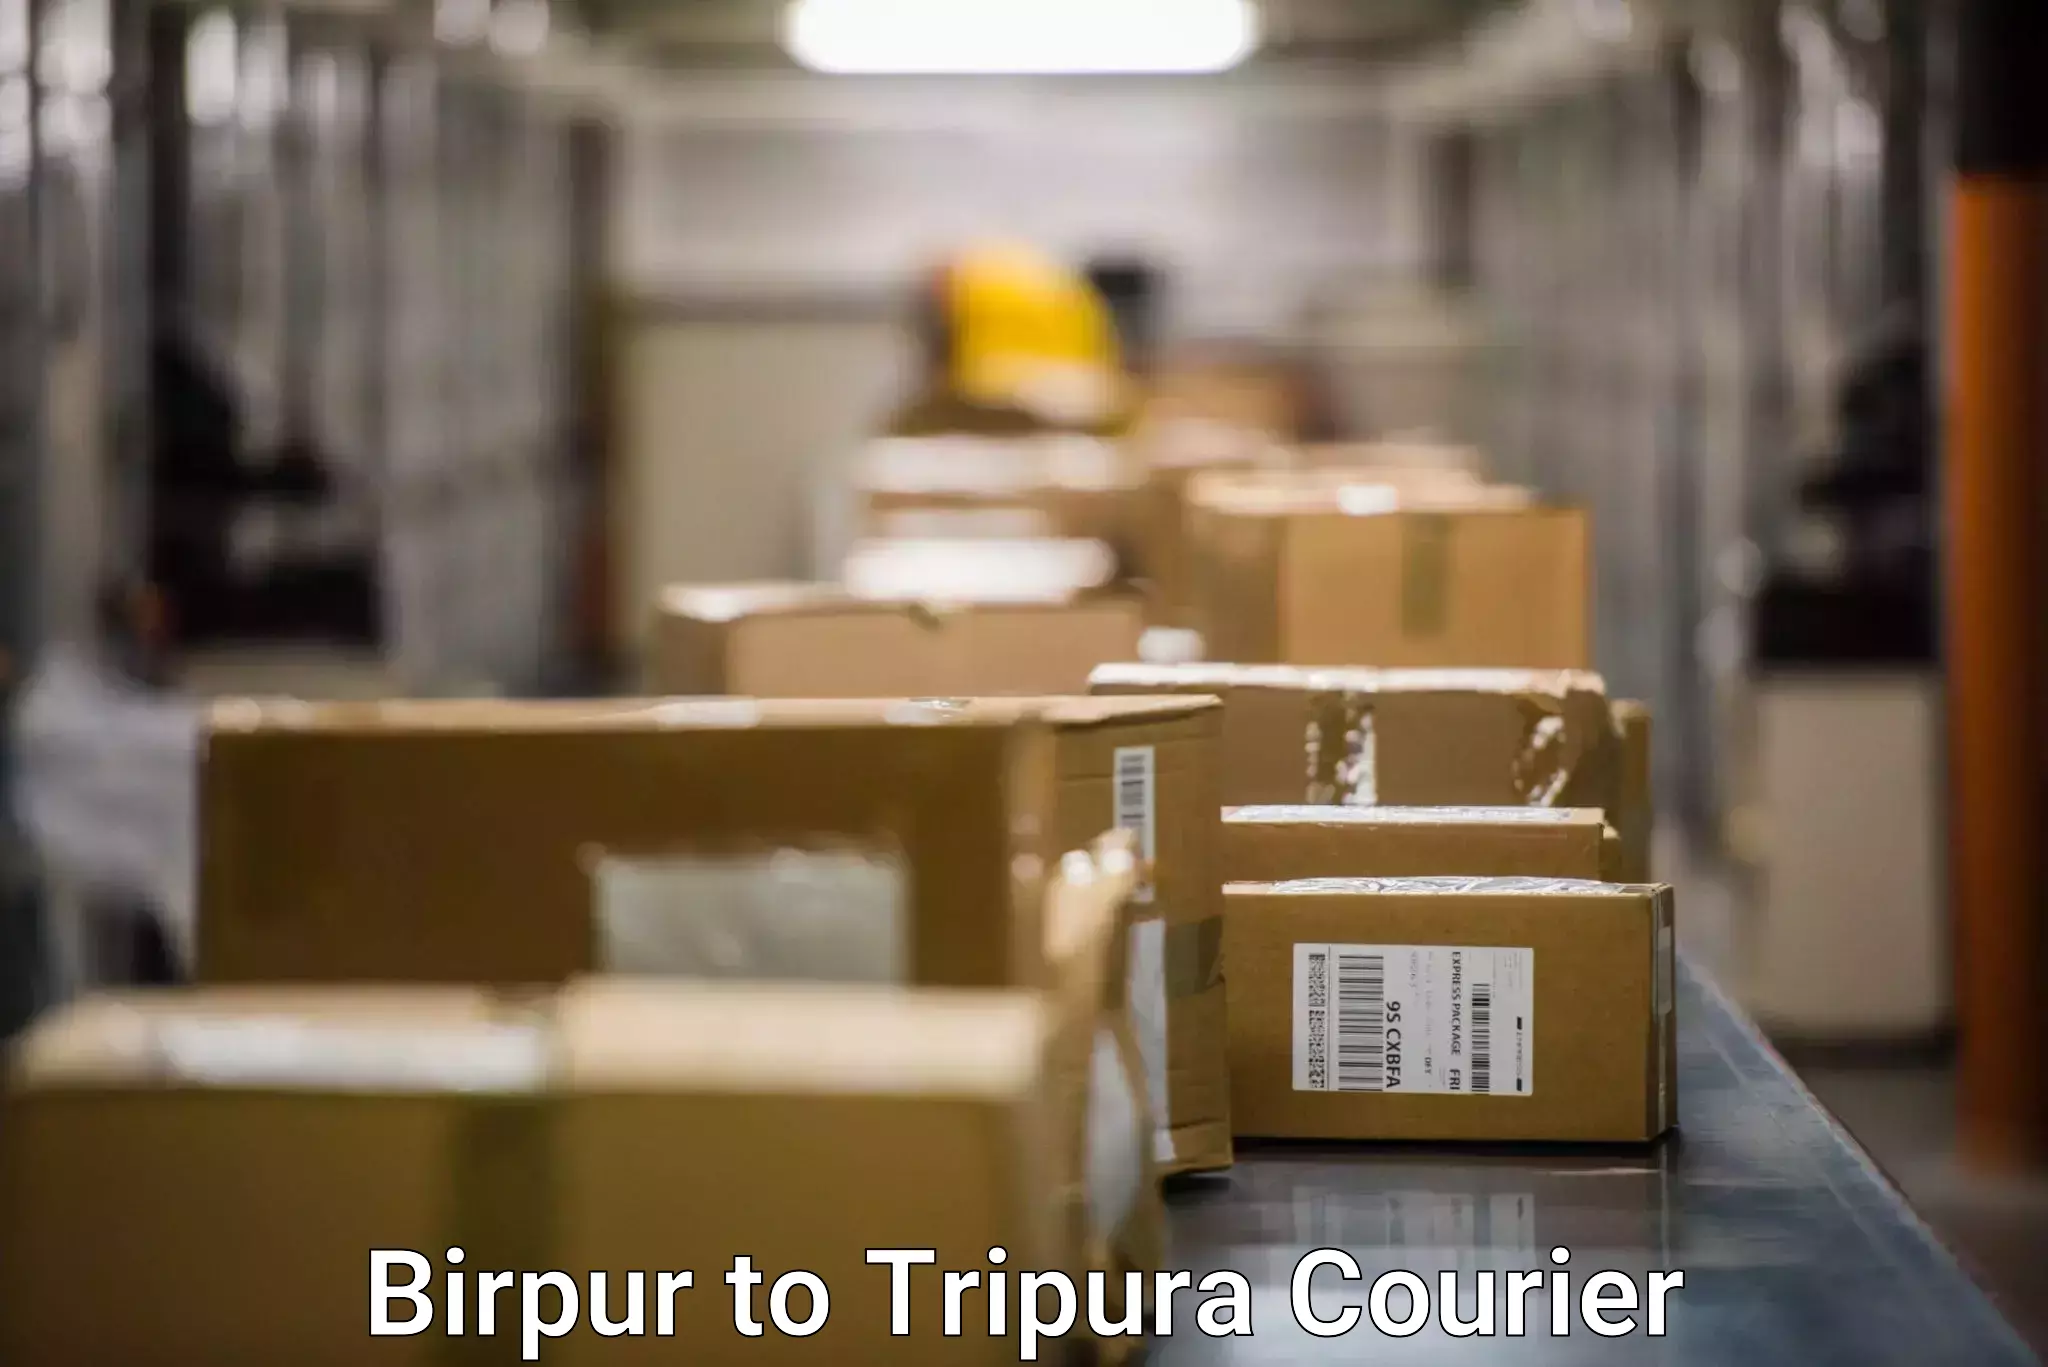 Postal and courier services Birpur to Udaipur Tripura